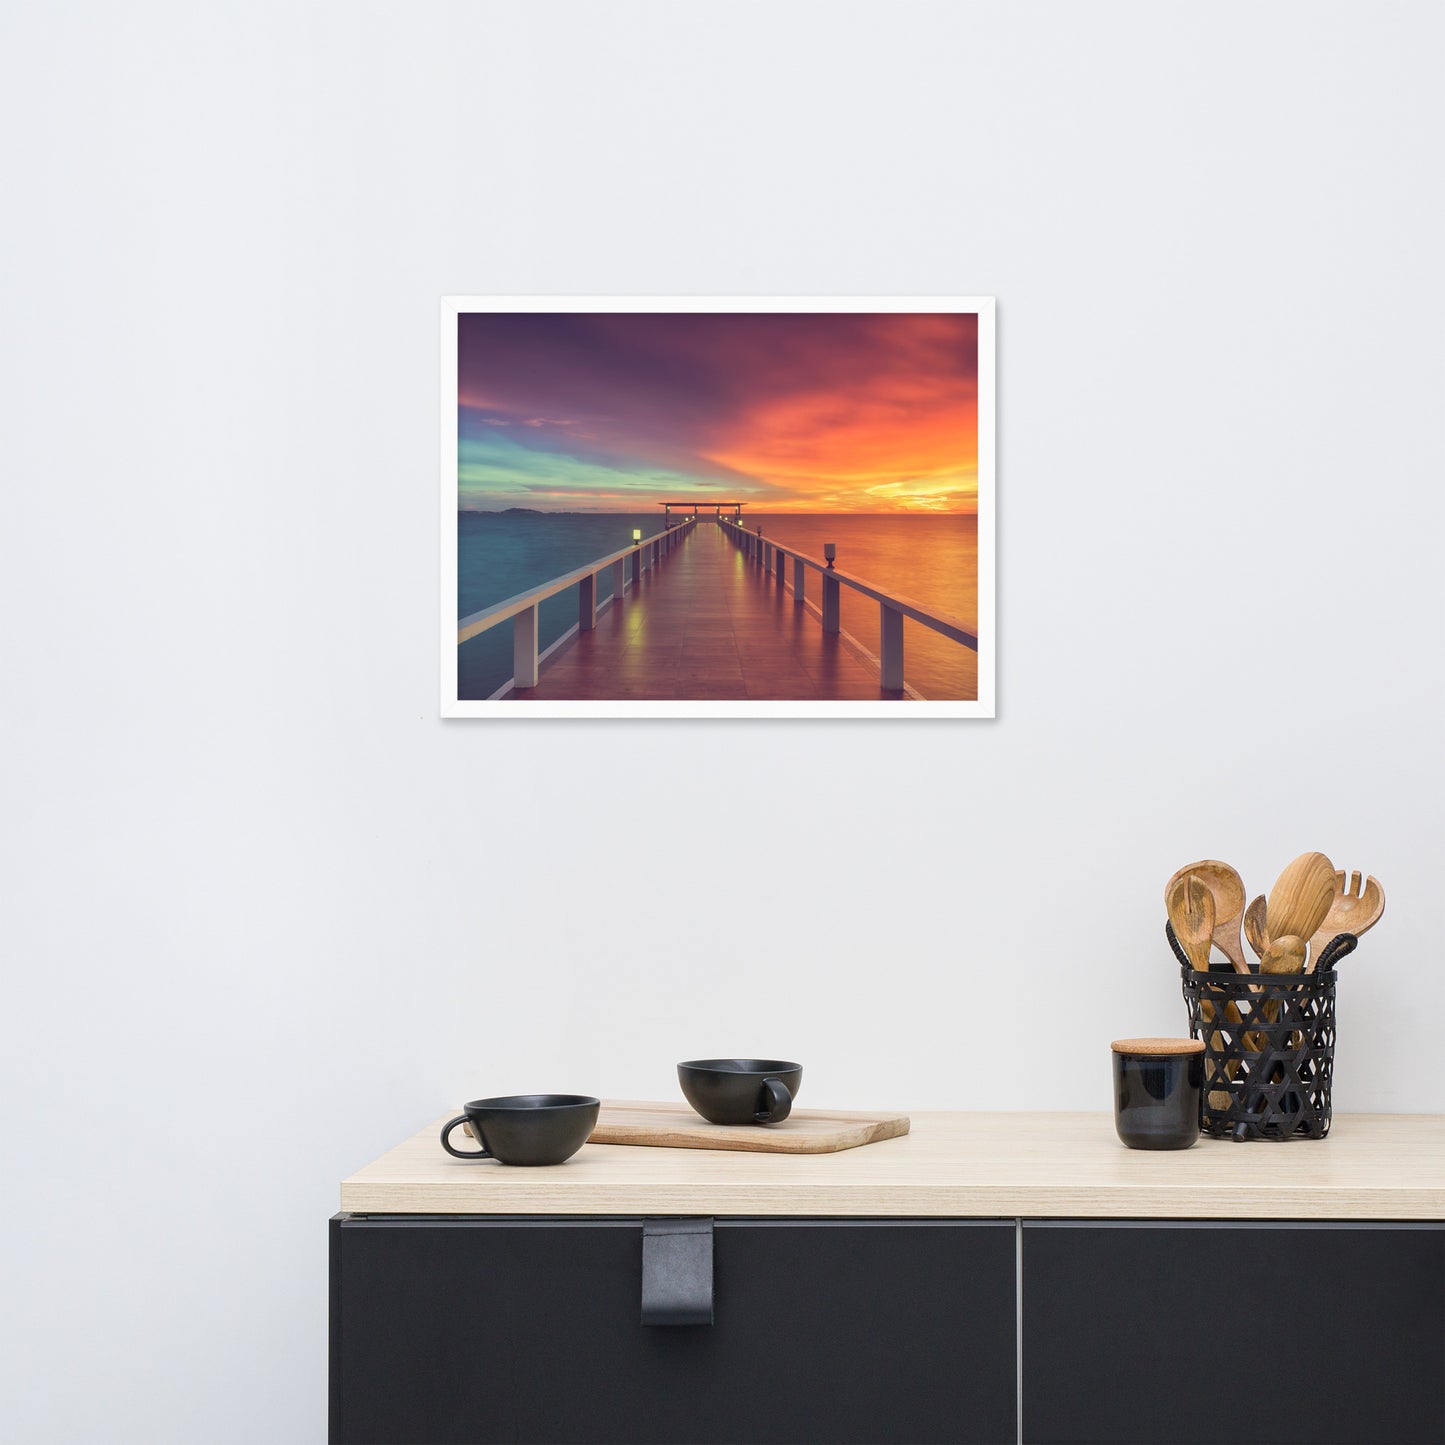 Framed Beach Pictures: Surreal Wooden Pier At Sunset with Intrigued Effect - Coastal / Seascape / Nature / Landscape Photo Framed Artwork - Wall Decor